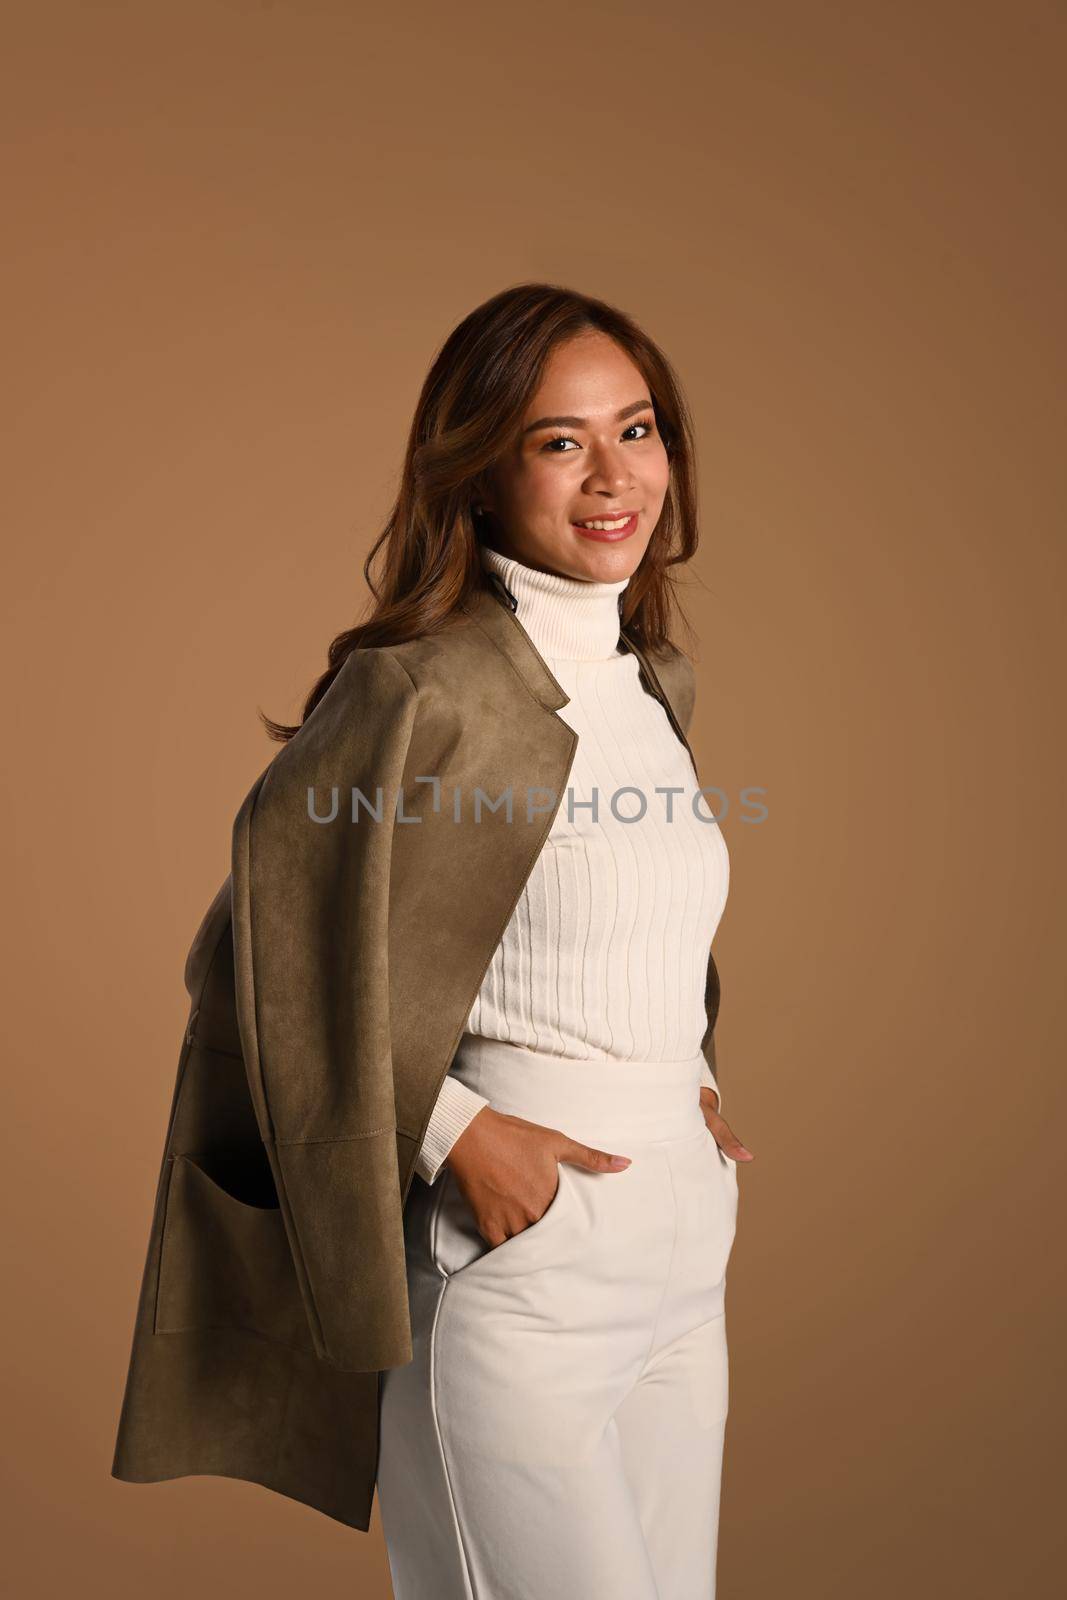 Elegant woman wearing trendy coat and holding hands in pockets standing on brown background. Autumn and Winter concept.